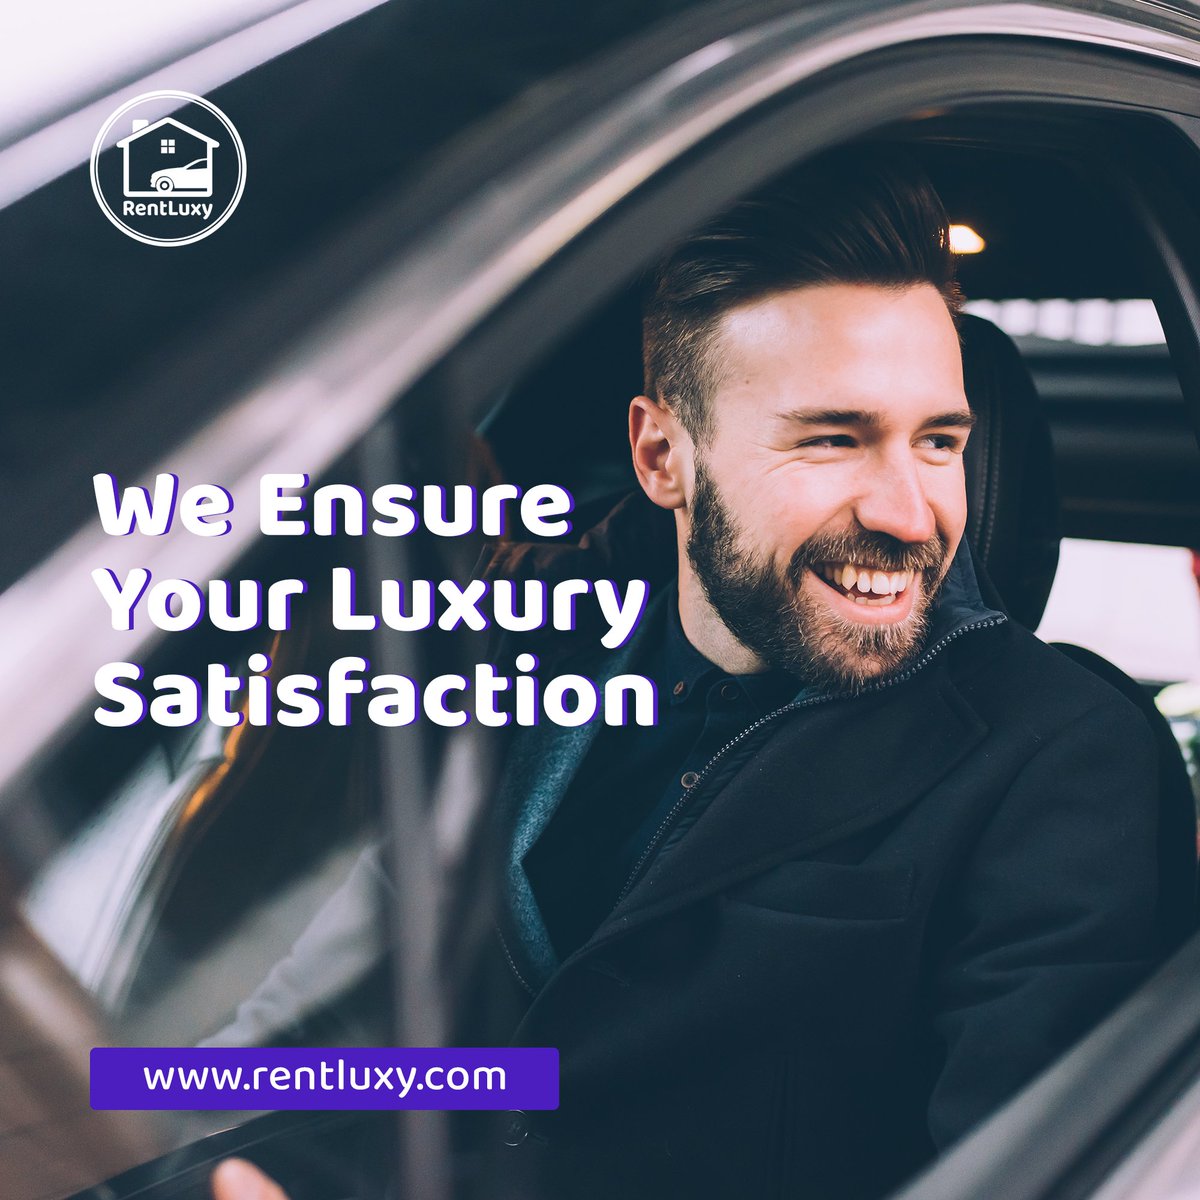 From elegance to excellence, we've got your luxury satisfaction in every mile. 🛣️🚗 

#rentluxy #trip #luxuryrental #carrental #luxury #car #satisfaction #fleet #texas #usa